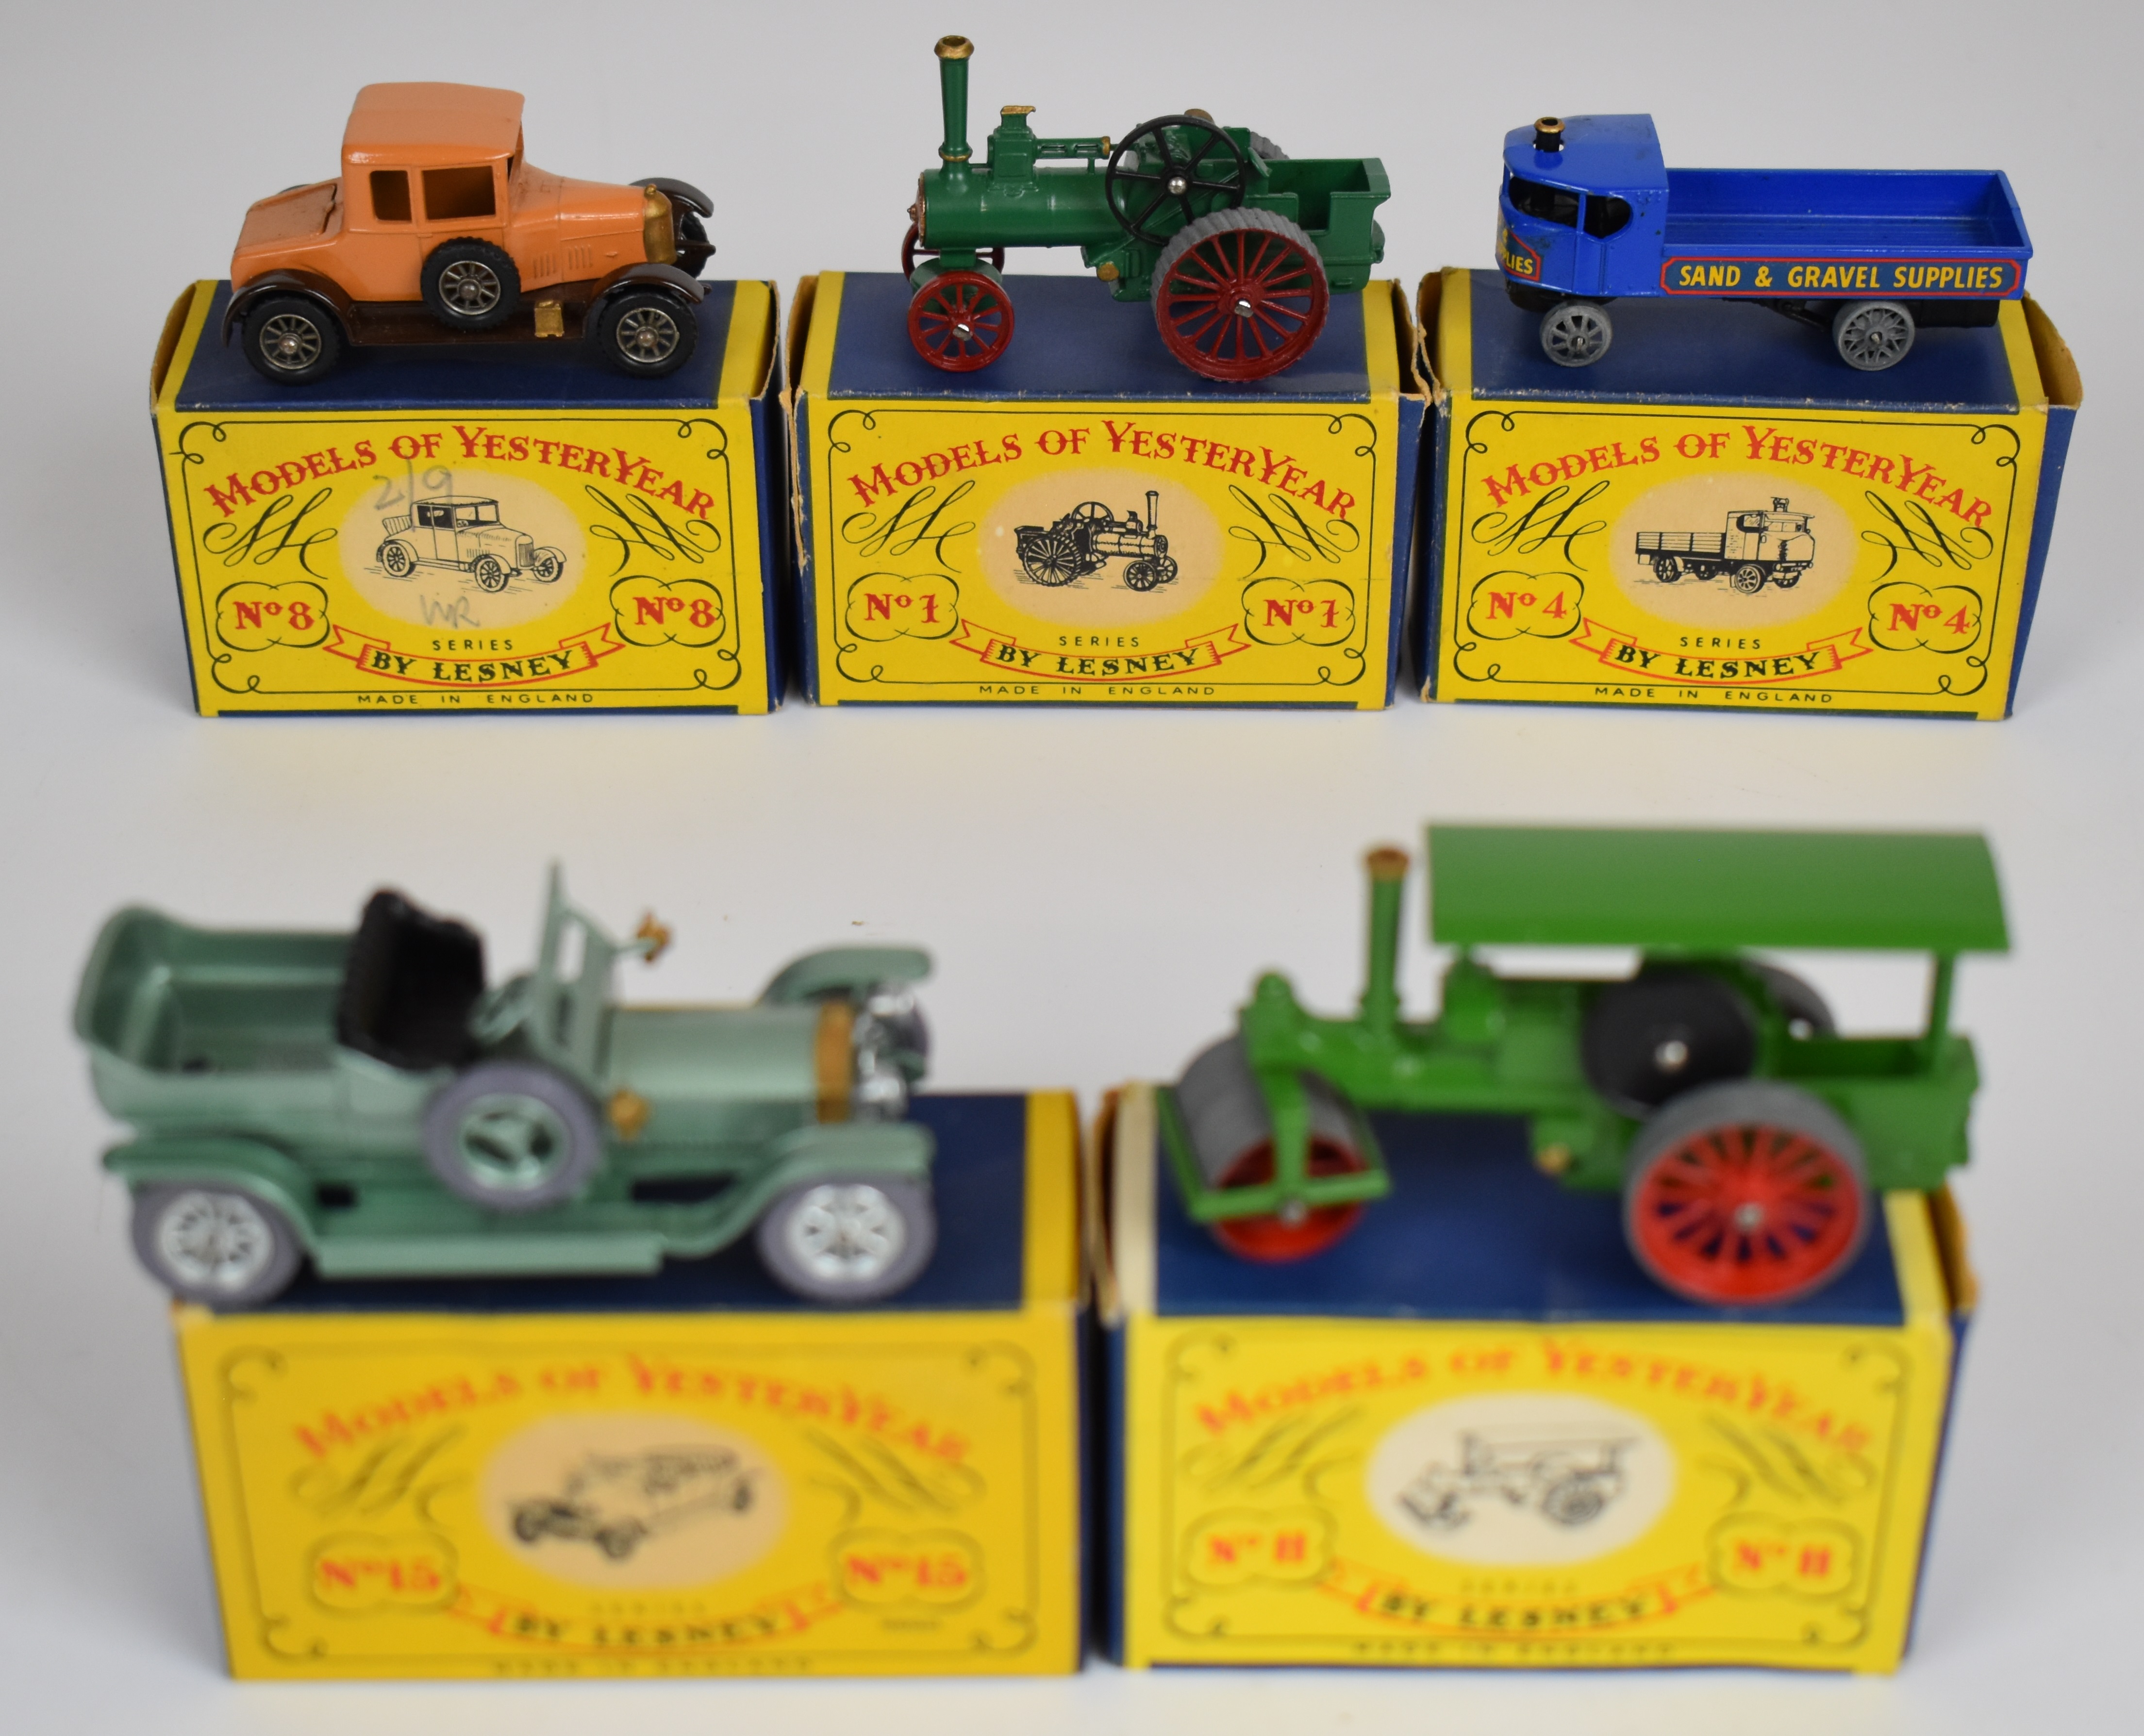 Five Matchbox Models of Yesteryear diecast model vehicles comprising numbers 1, 4, 8, 11 and 15, all